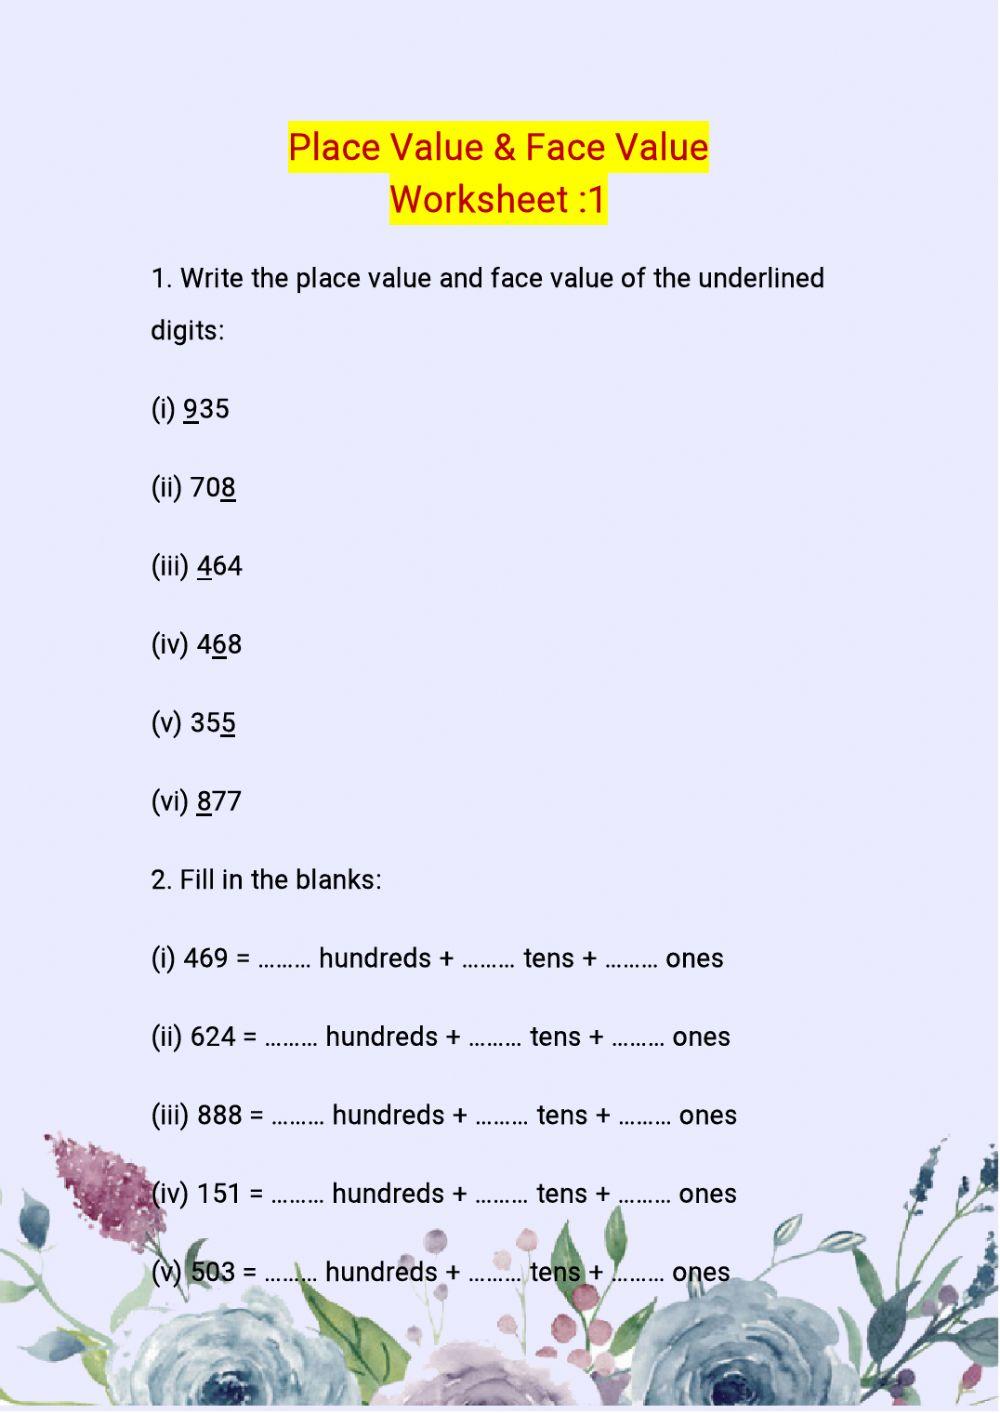 place value and face value (1)